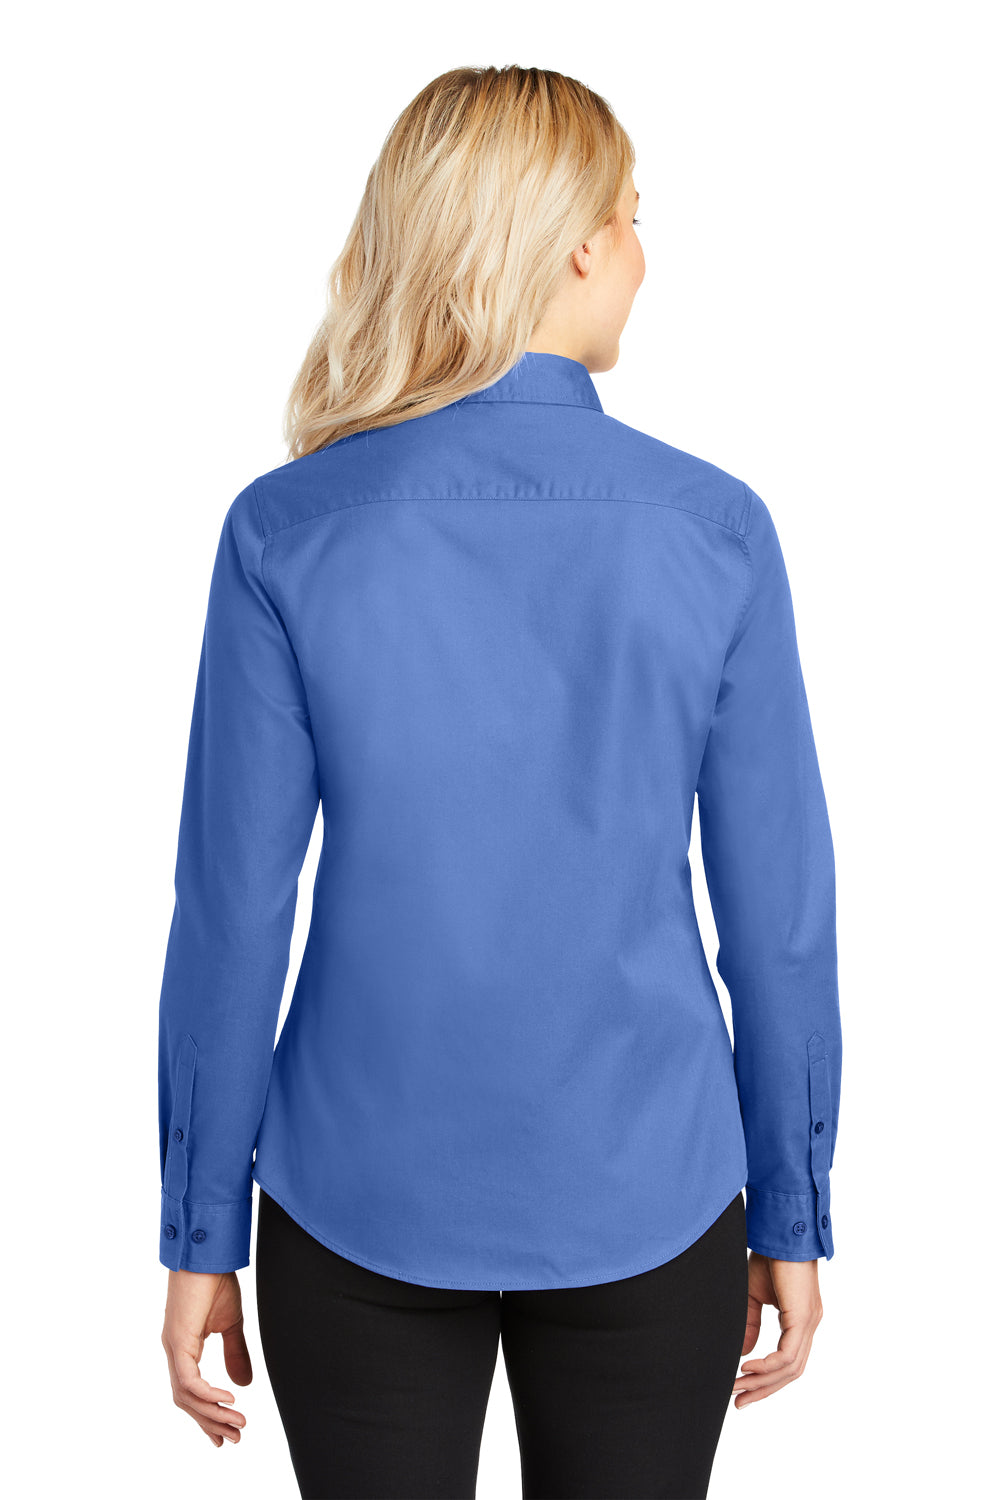 Port Authority L608 Womens Easy Care Wrinkle Resistant Long Sleeve Button Down Shirt Ultramarine Blue Back